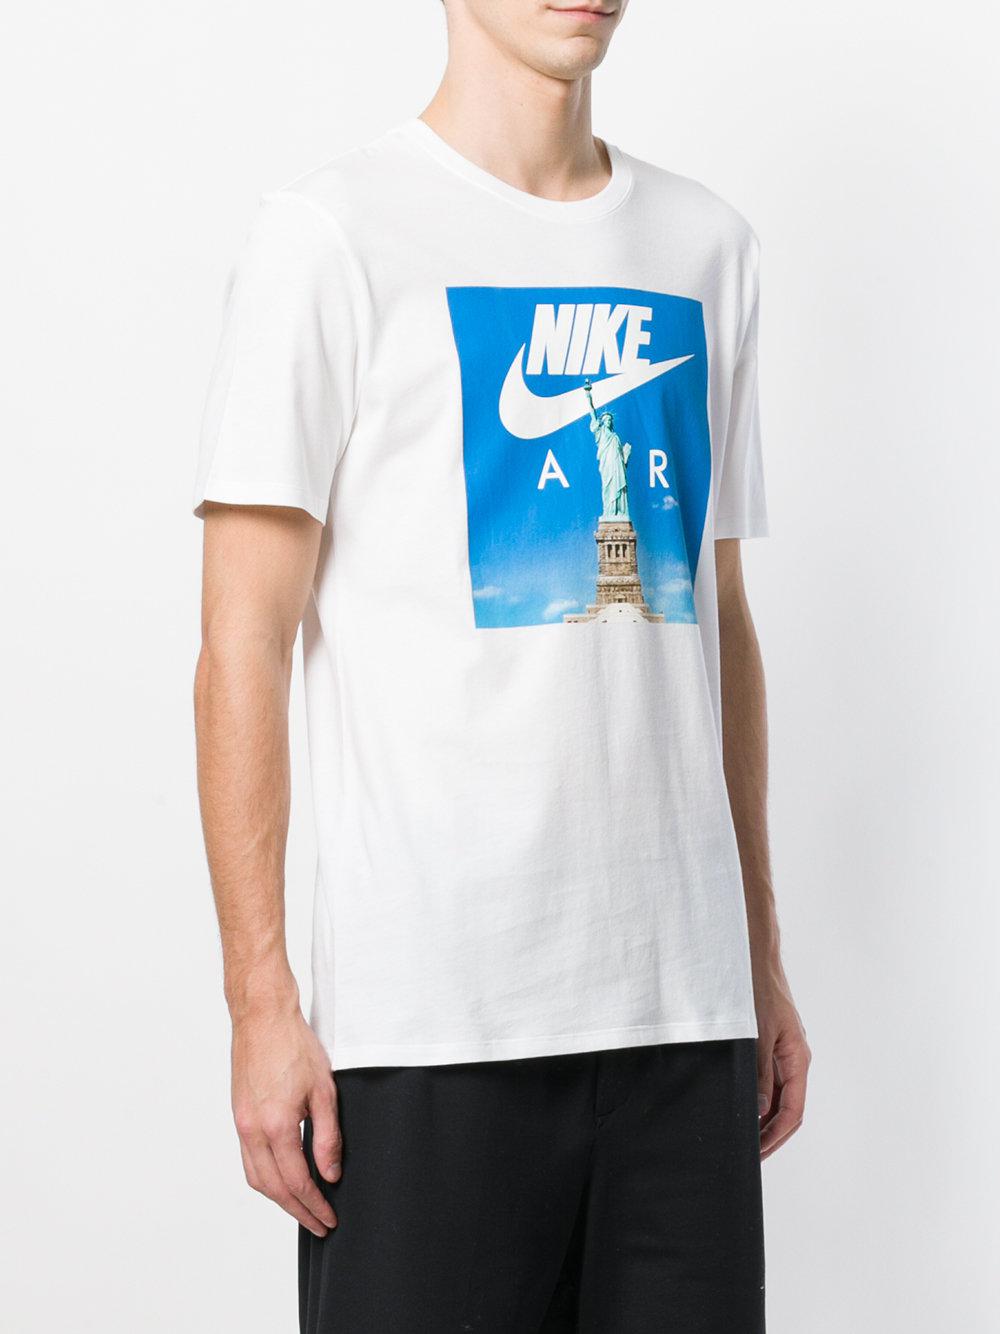 Nike Cotton Statue Of Liberty Print Sportswear T-shirt in White for Men -  Lyst